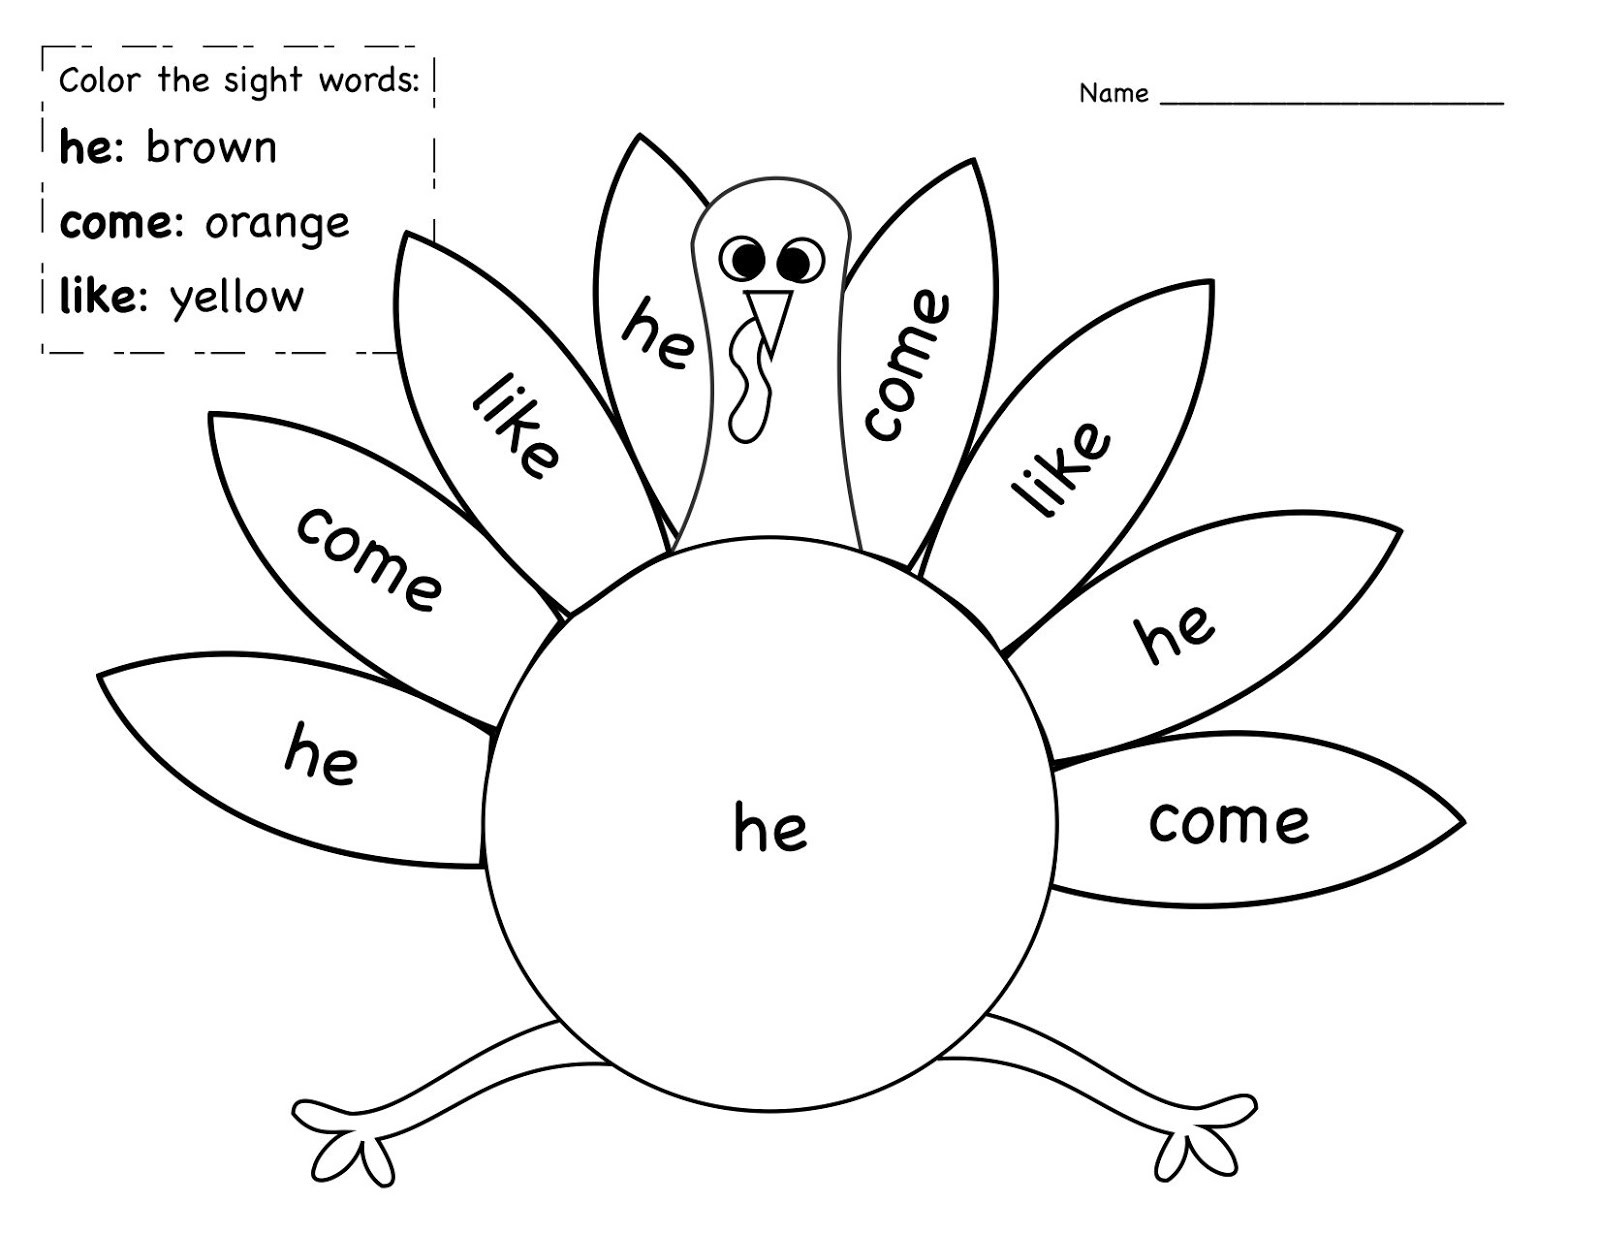 Free Printable Sight Word Coloring Pages
 Kinder Learning Garden November Sight Word Freebie